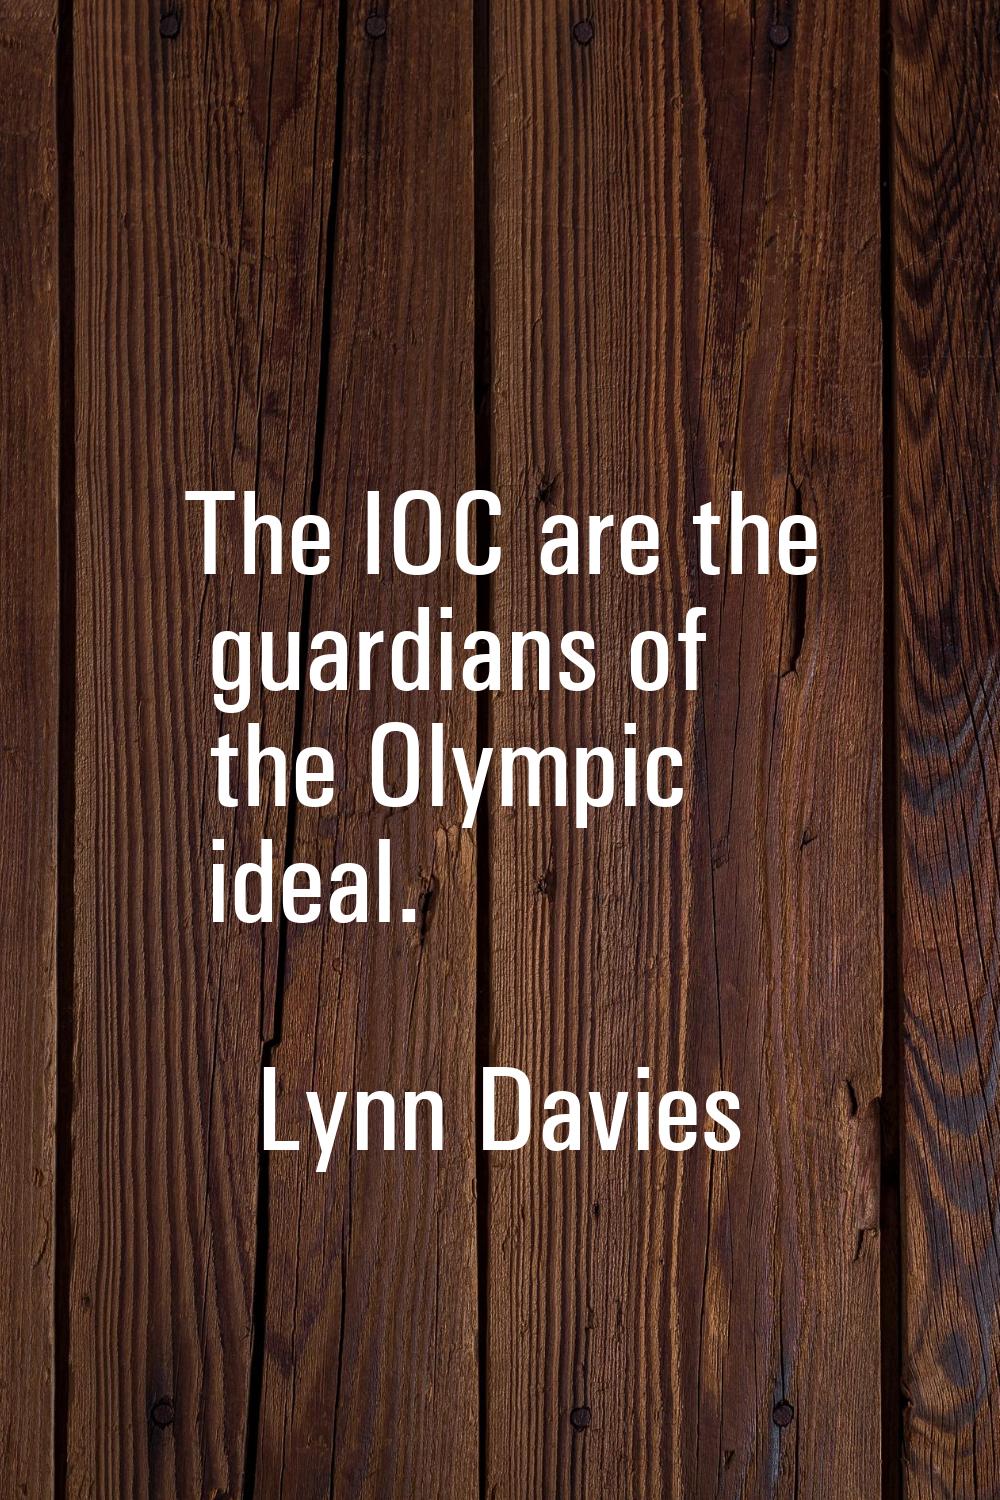 The IOC are the guardians of the Olympic ideal.